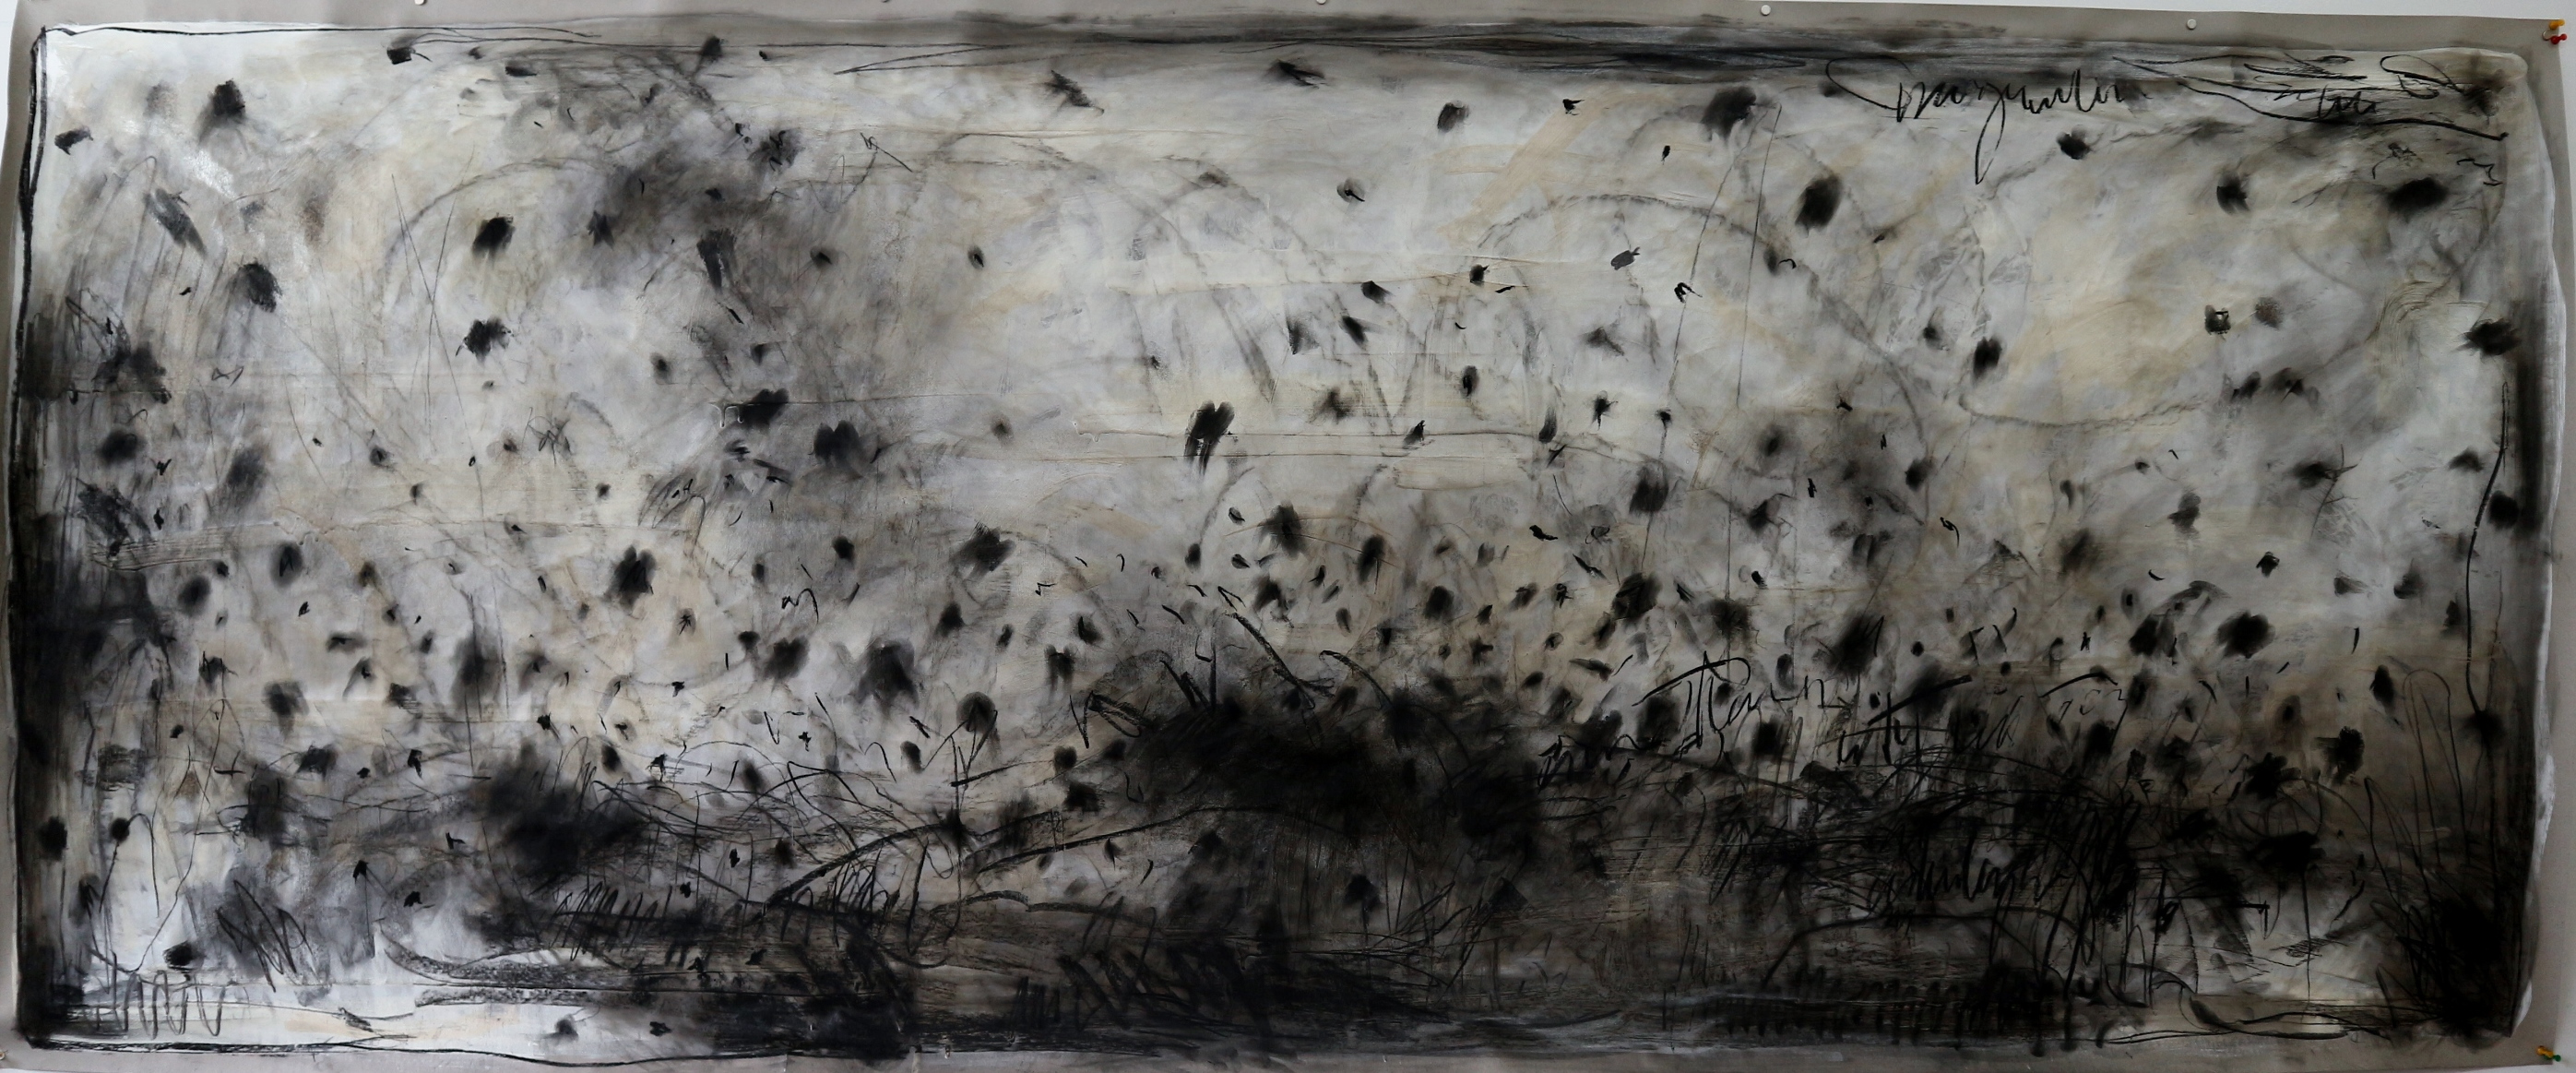 Dessin A, 2018, acrylic and charcoal on paper, 40 x 99 in.